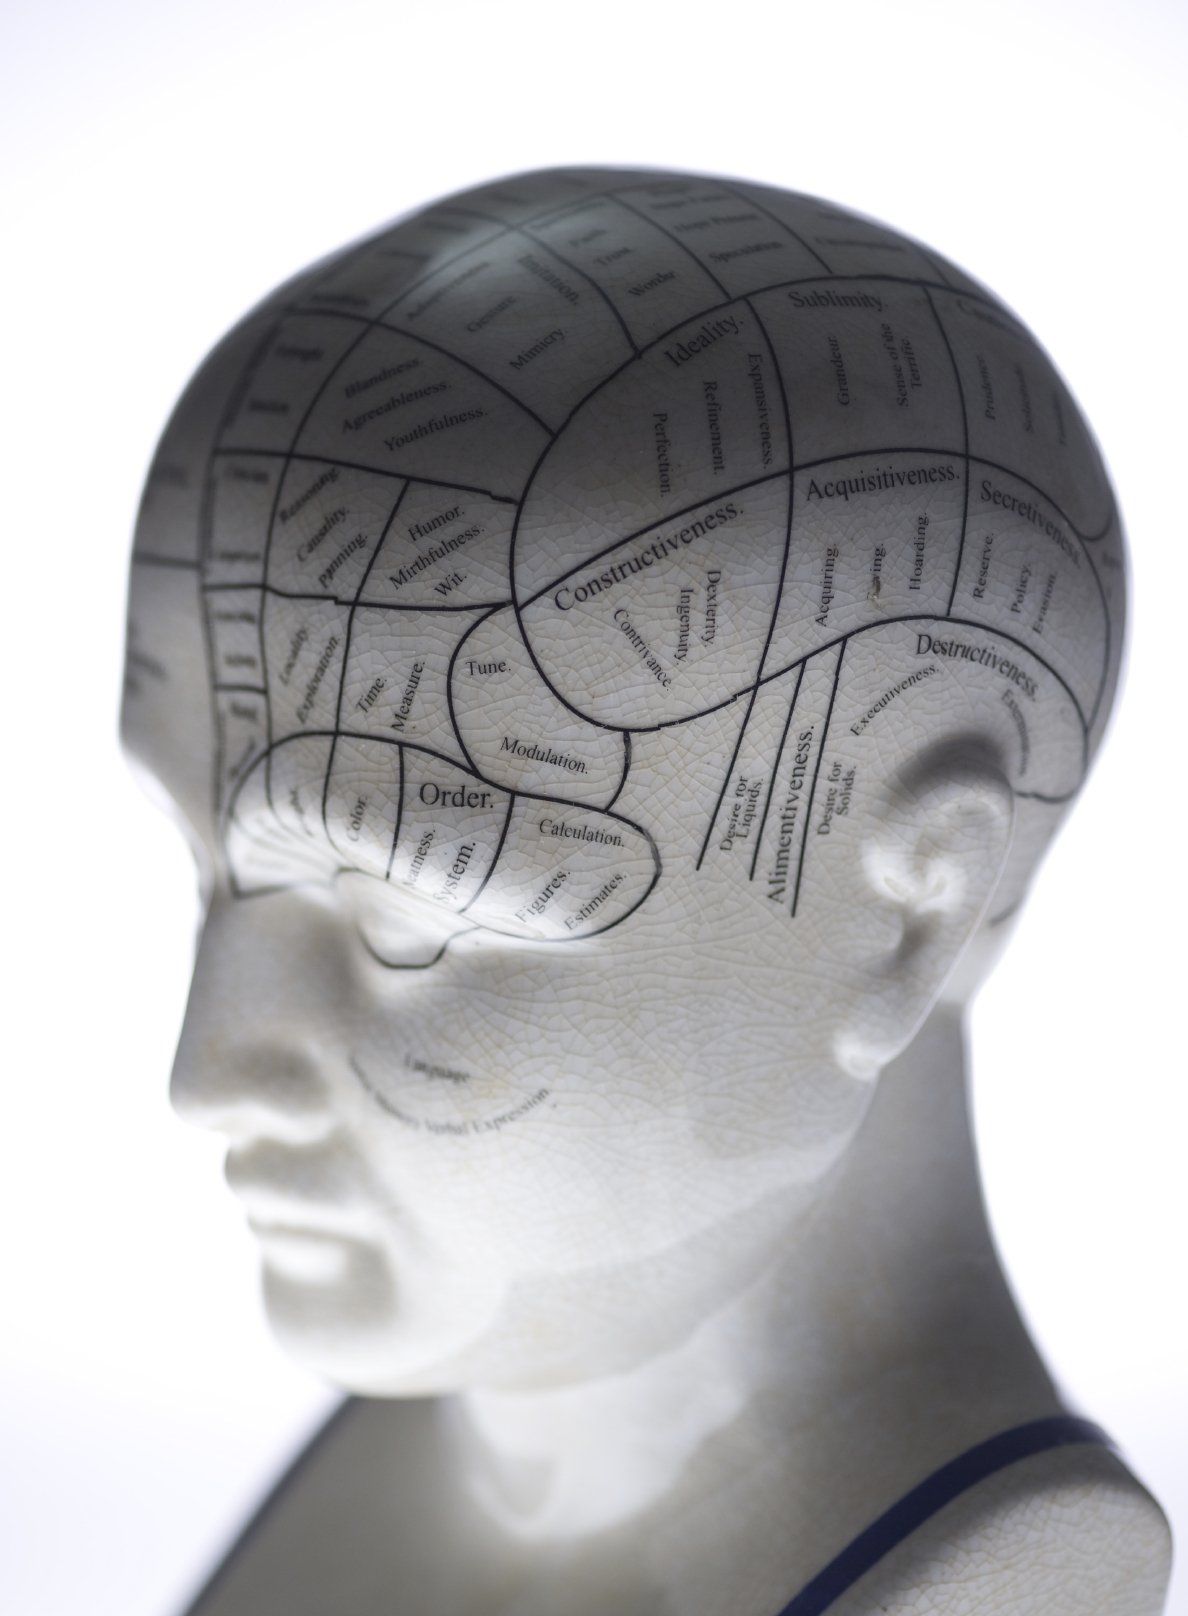 Grey bust of the human head showing  the various parts of the brain